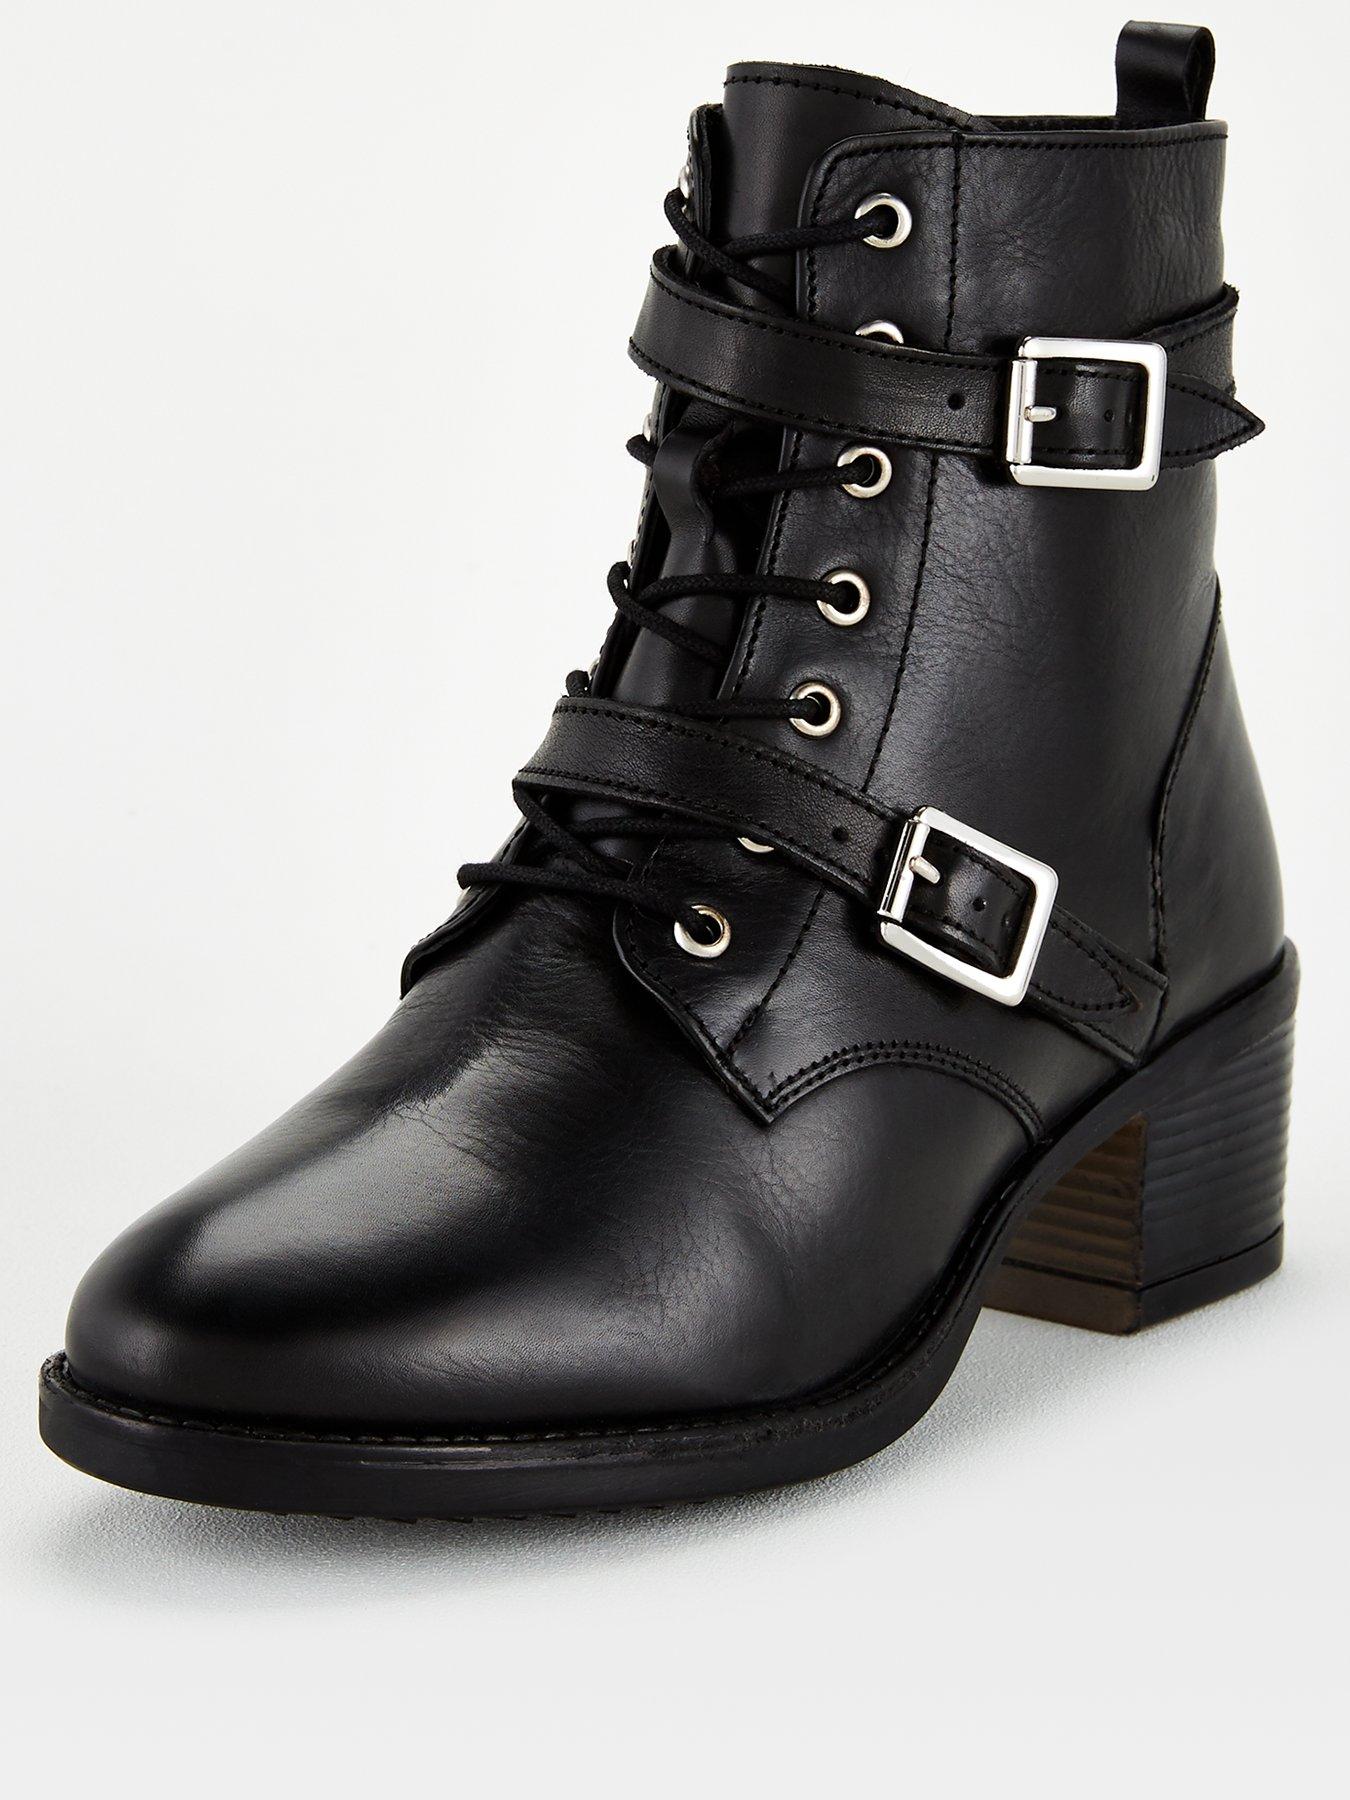 dune paxtone black boots